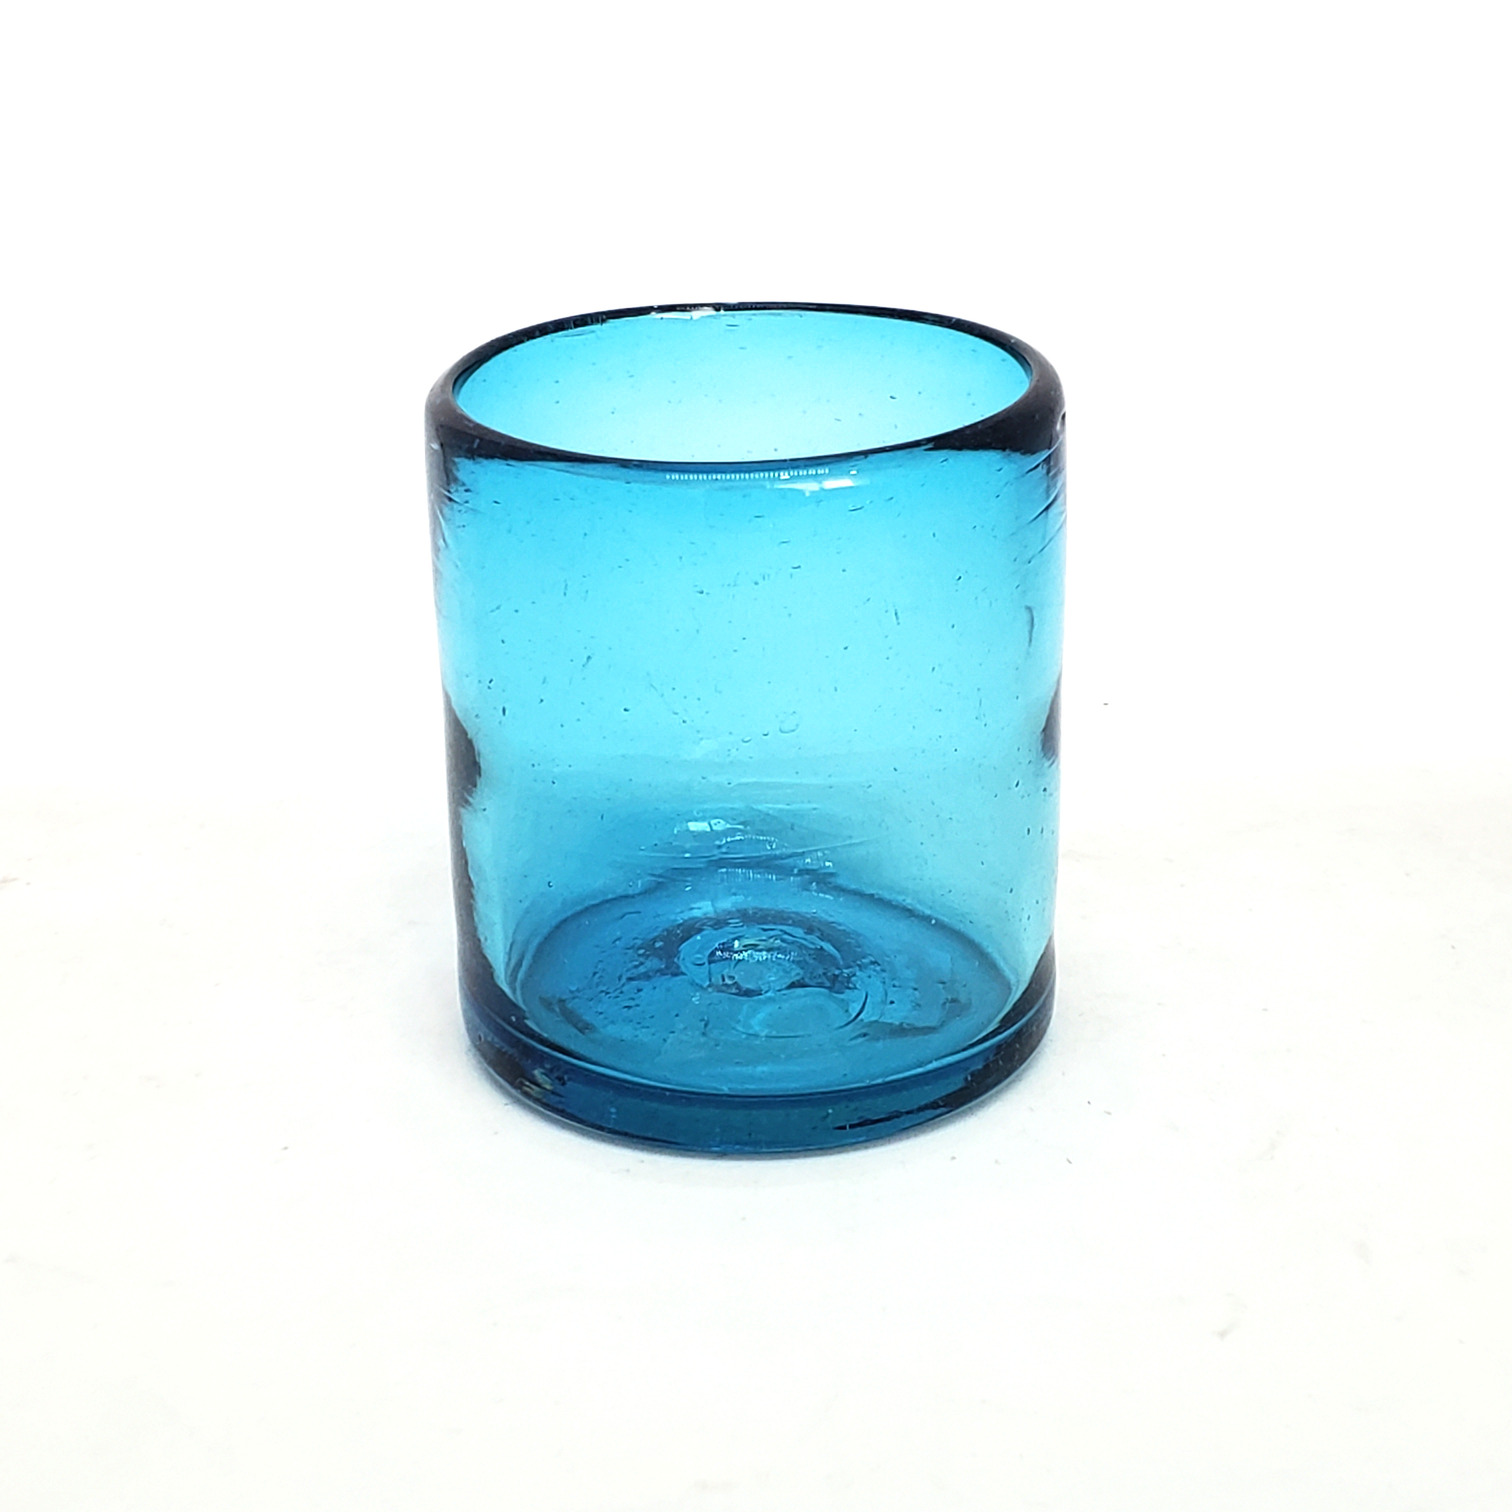 Wholesale Mexican Glasses / Solid Aqua Blue 9 oz Short Tumblers  / Enhance your favorite drink with these colorful handcrafted glasses.